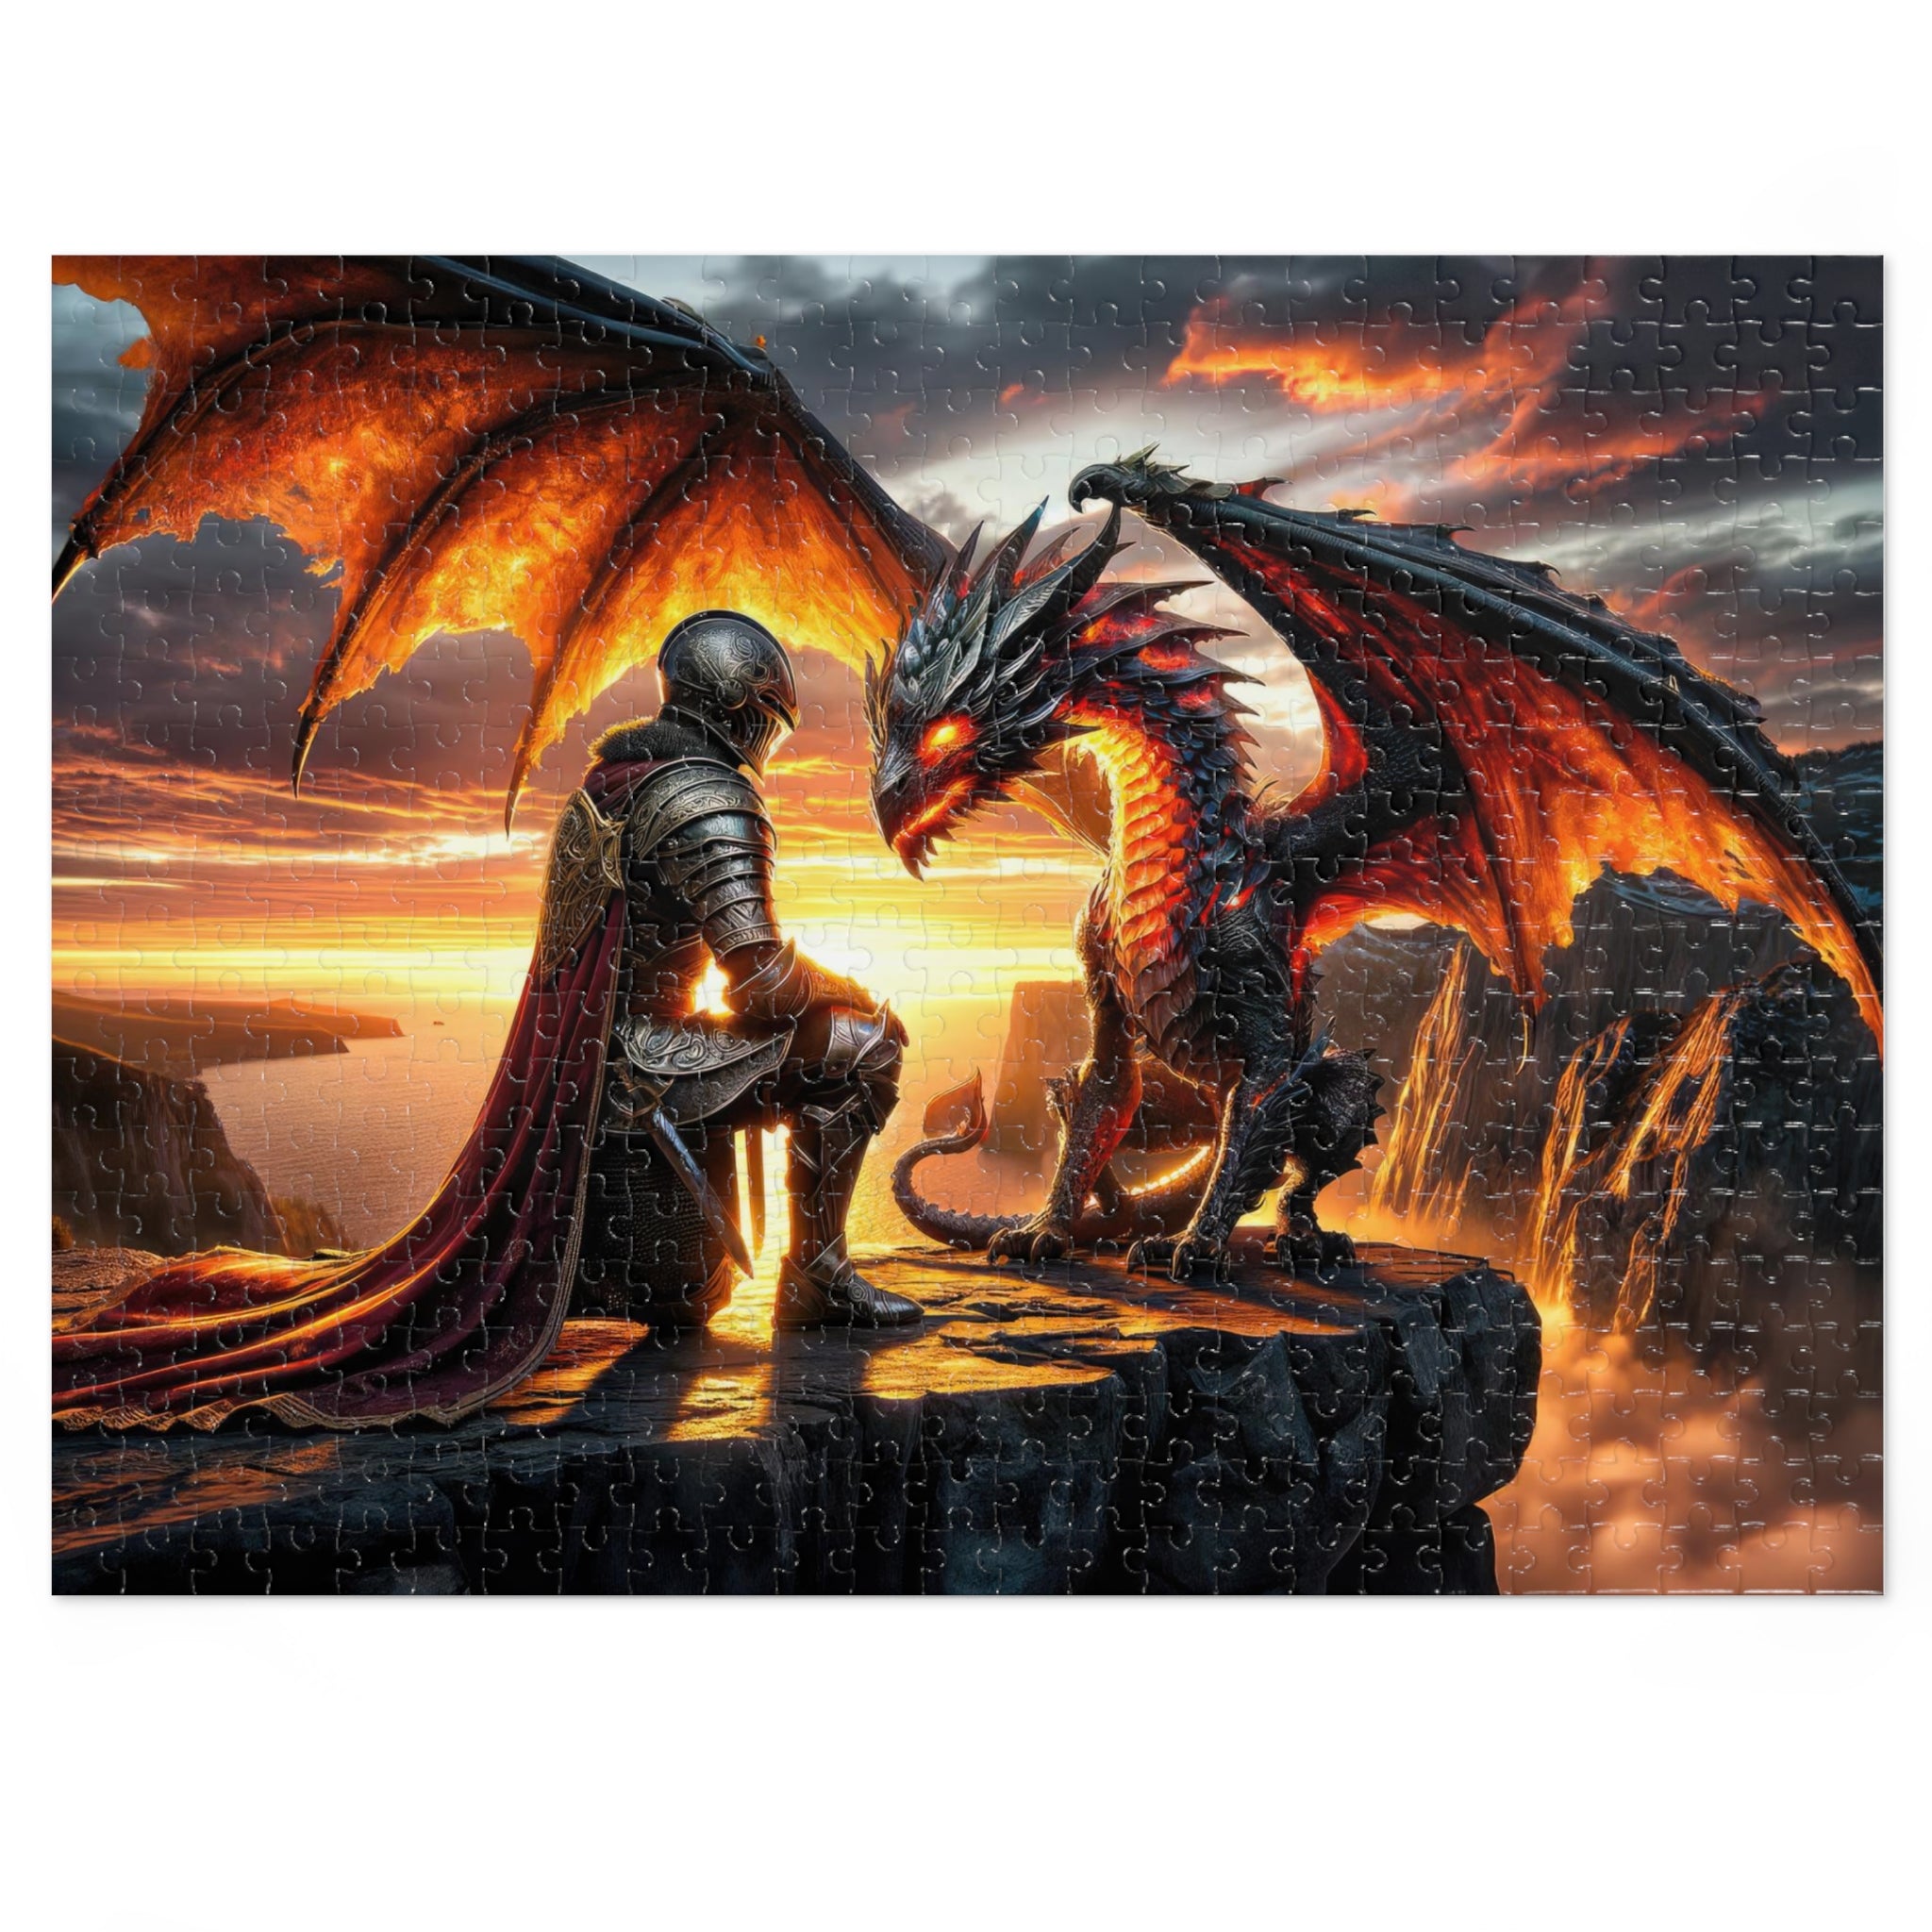 Twilight Pact on Dragon's Bluff Jigsaw Puzzle